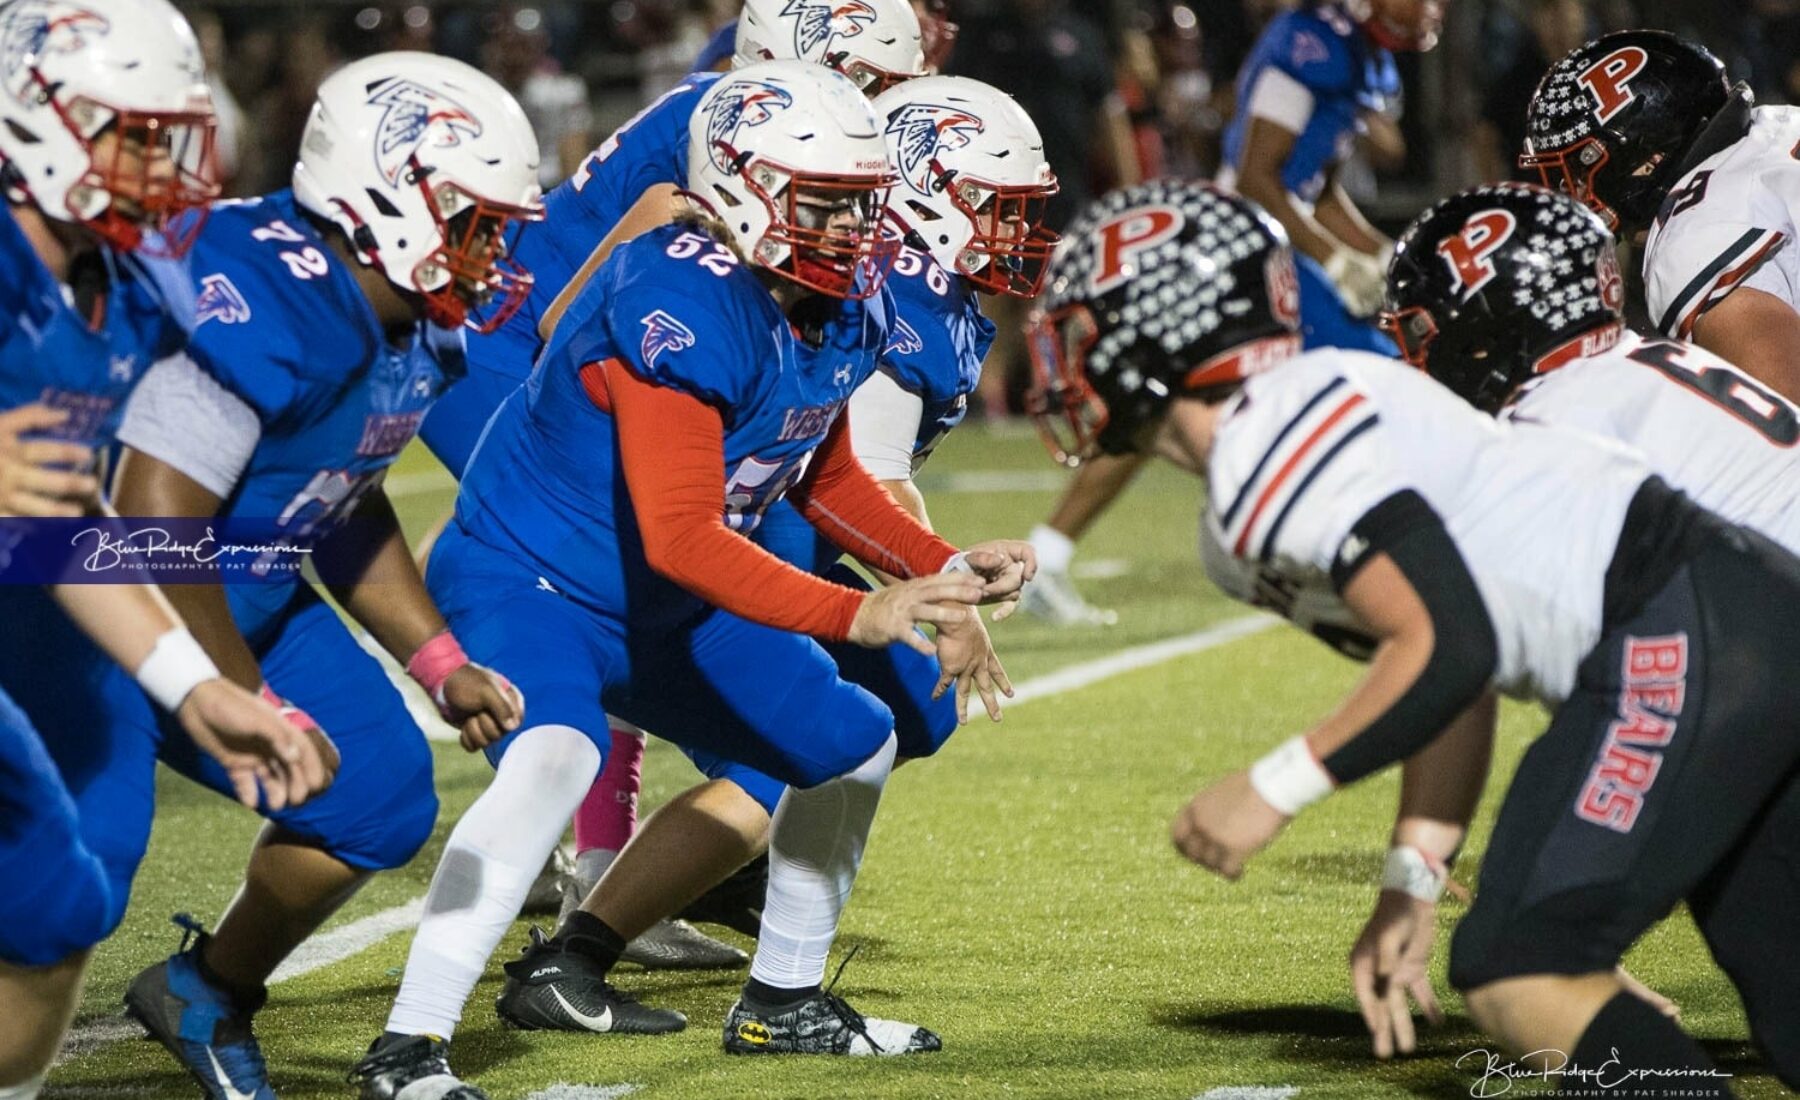 West Henderson Football Remains Undefeated at 8-0